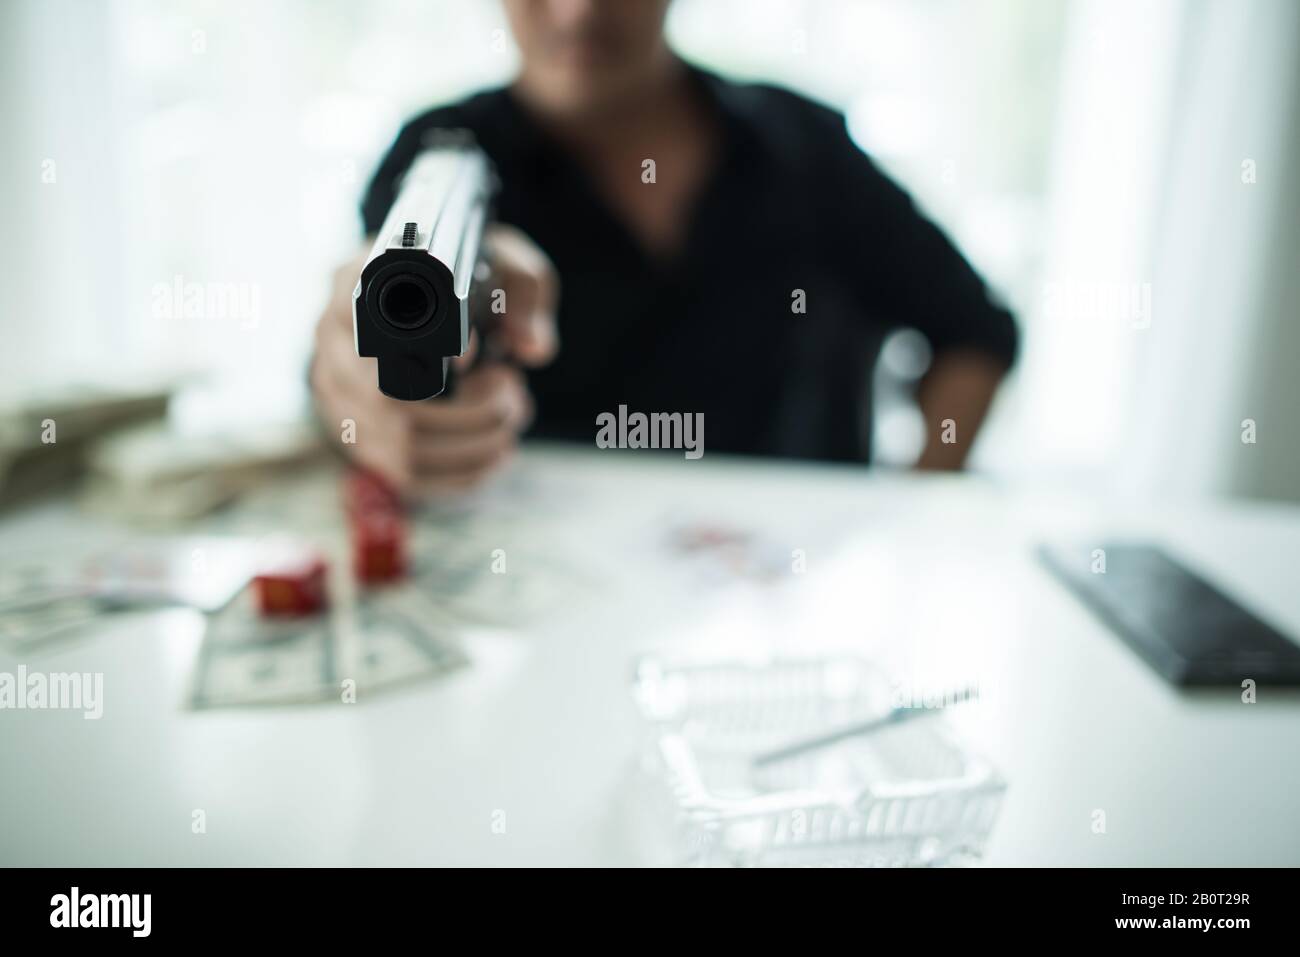 young man sitting on a table holding a gun, have alcohol glass and money on the table. Stock Photo